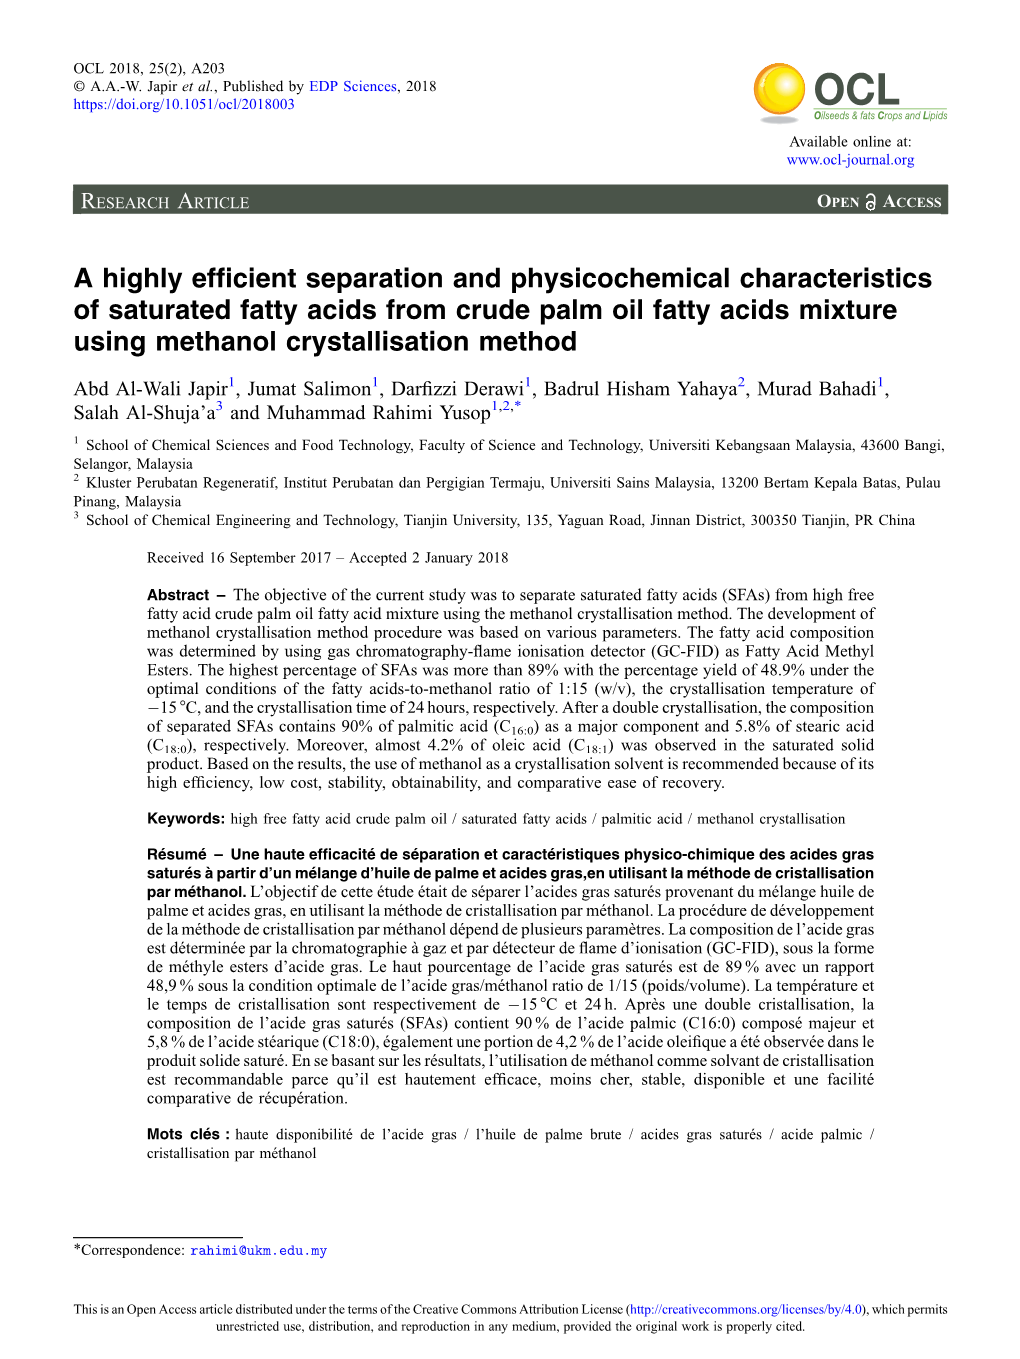 A Highly Efficient Separation and Physicochemical Characteristics of Saturated Fatty Acids from Crude Palm Oil Fatty Acids Mixtu